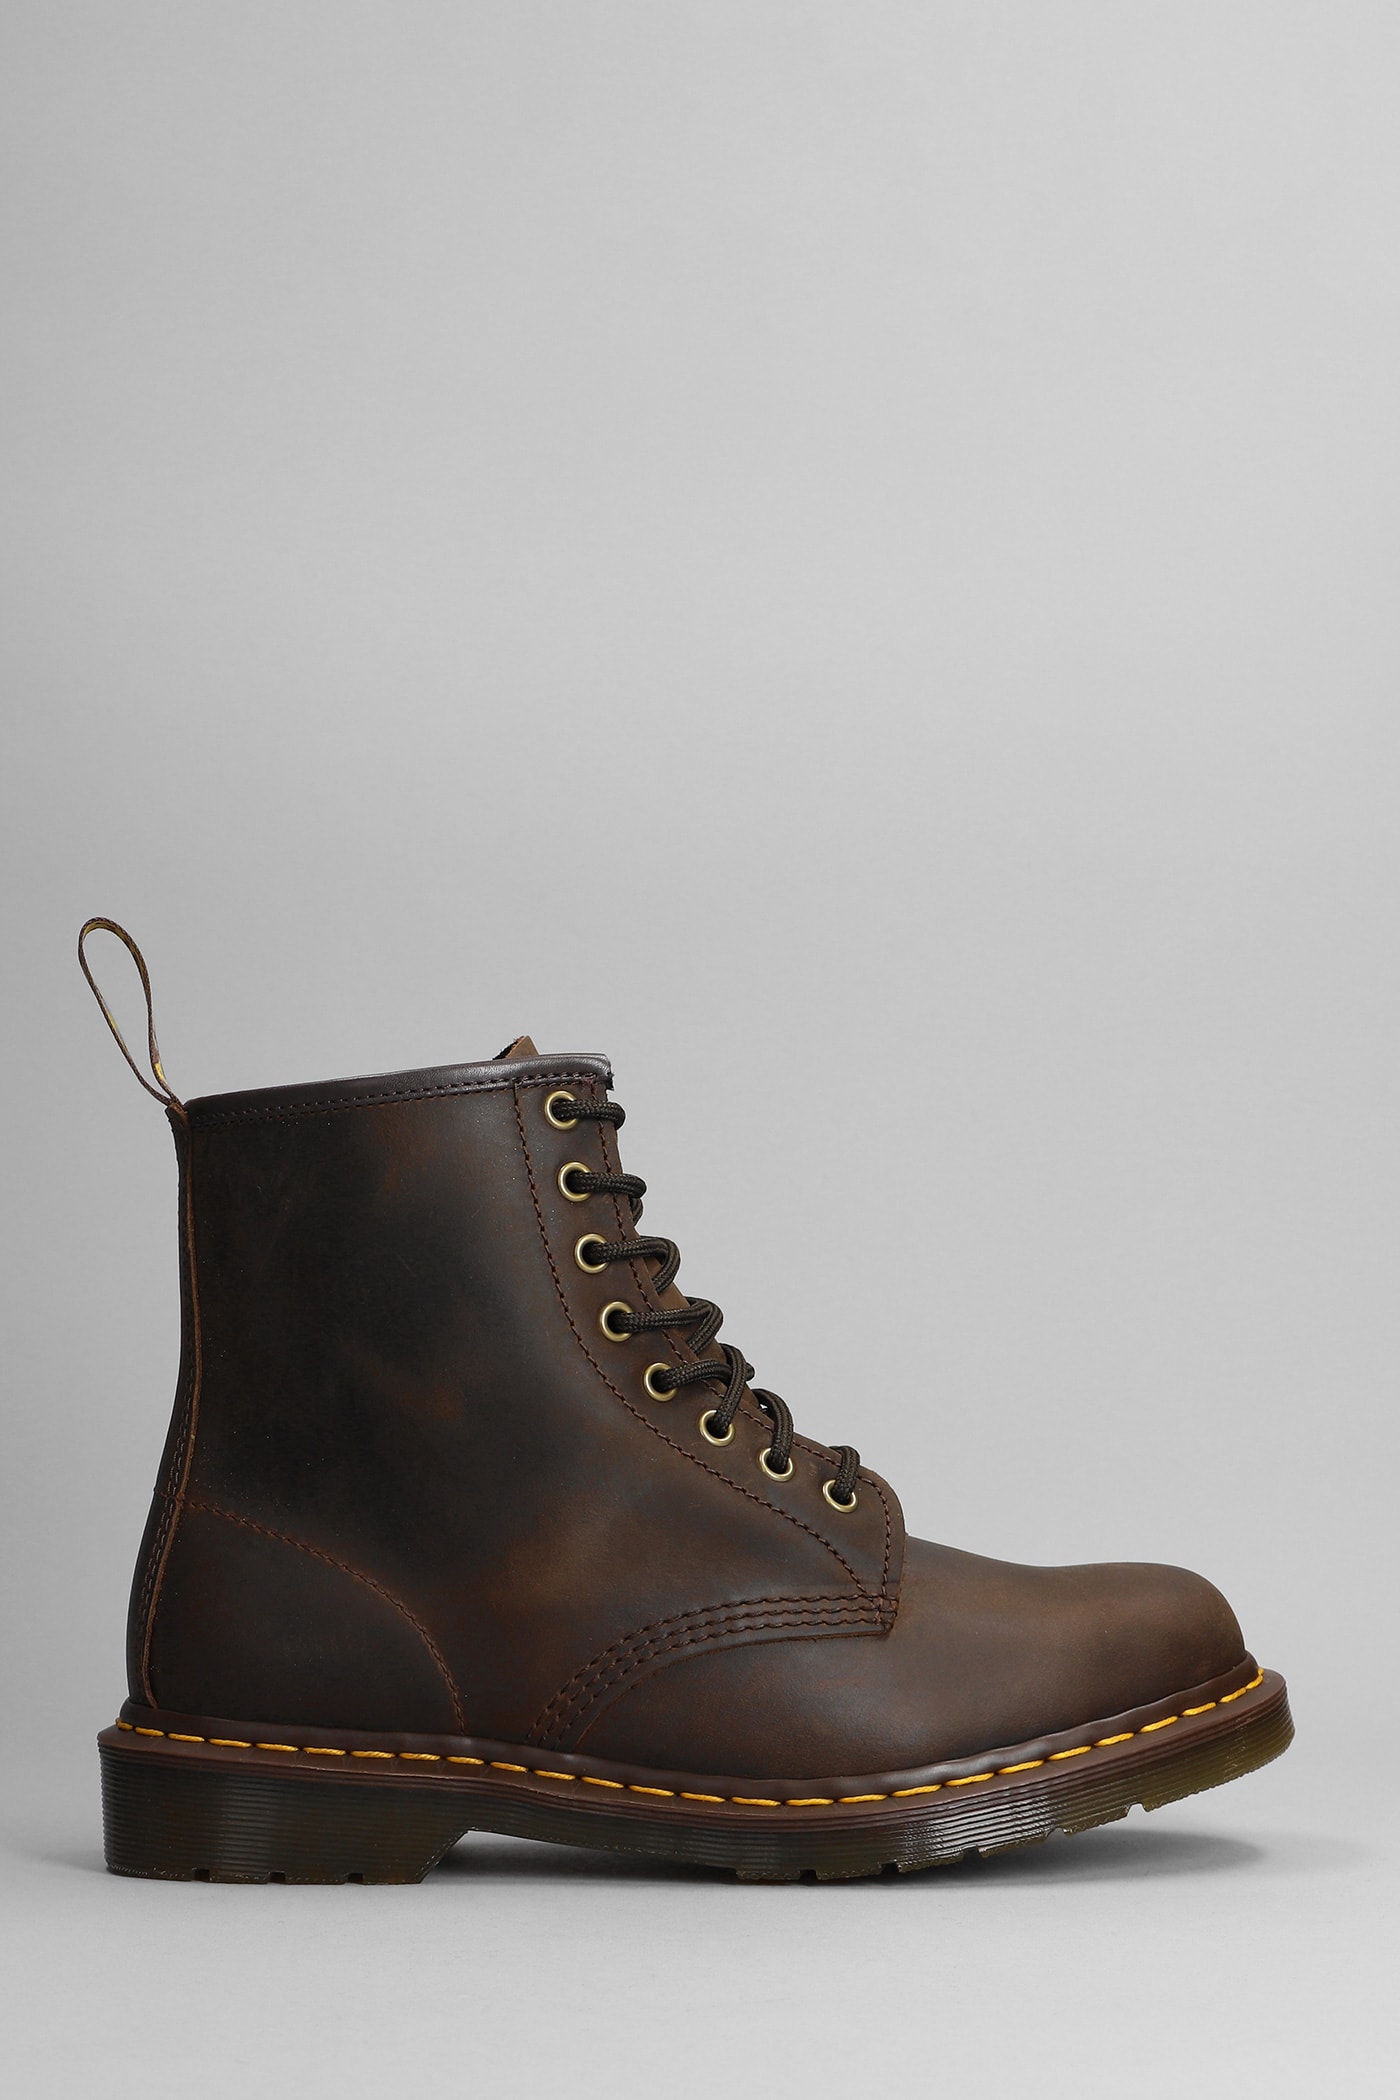 Dr. Martens 1460 Crazy Horse Combat Boots In Dark Brown Leather